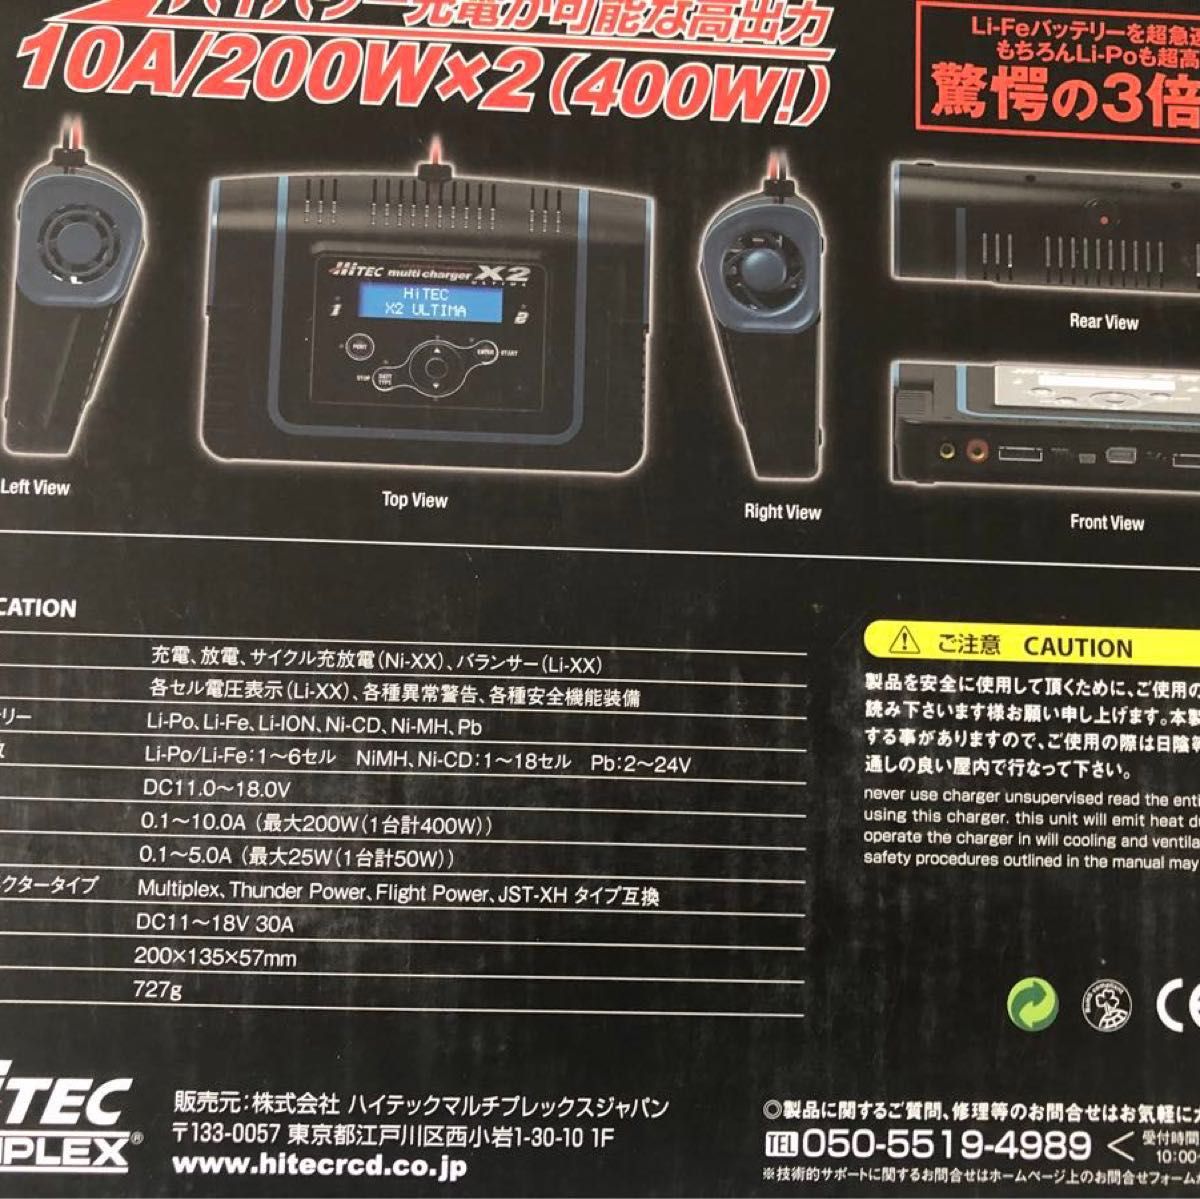 HiTEC multi charger x2 ULTIMA DCバランス充電器、POWER ZONE PS-25A 安定化電源